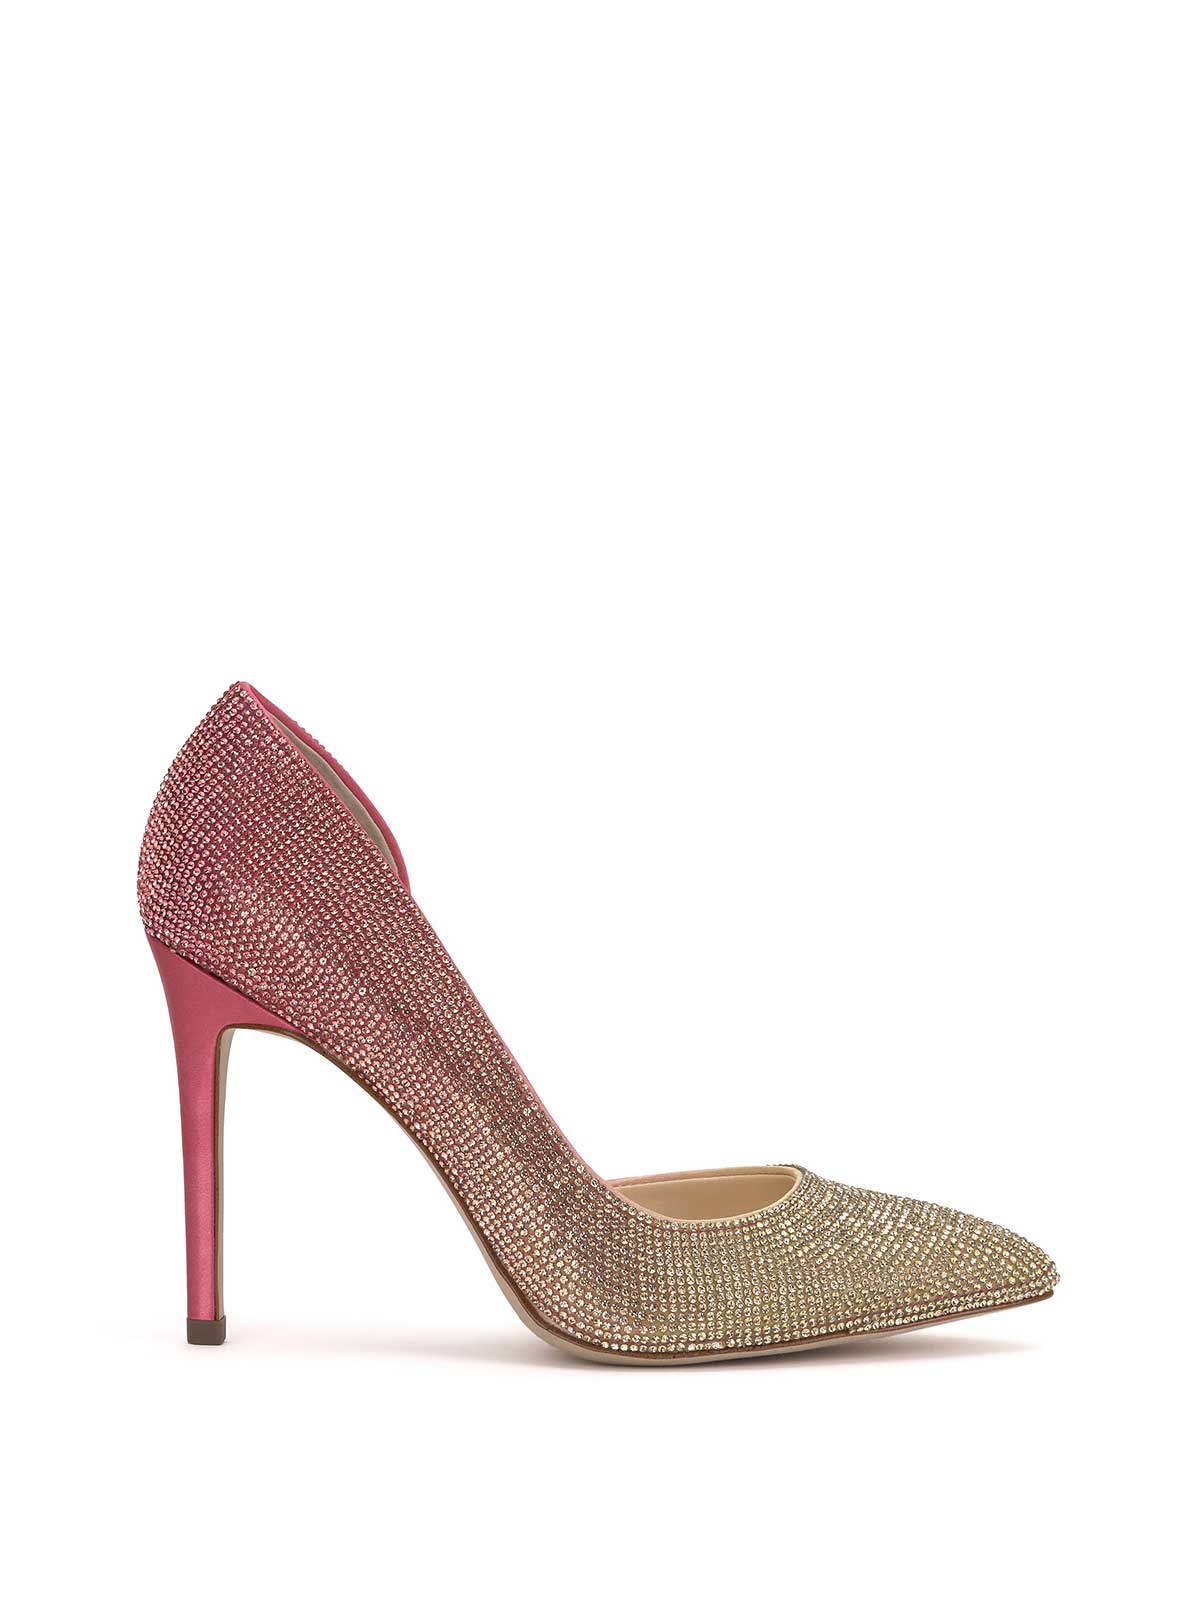 Image of Prizma D'Orsay Pump in Pink Ombre